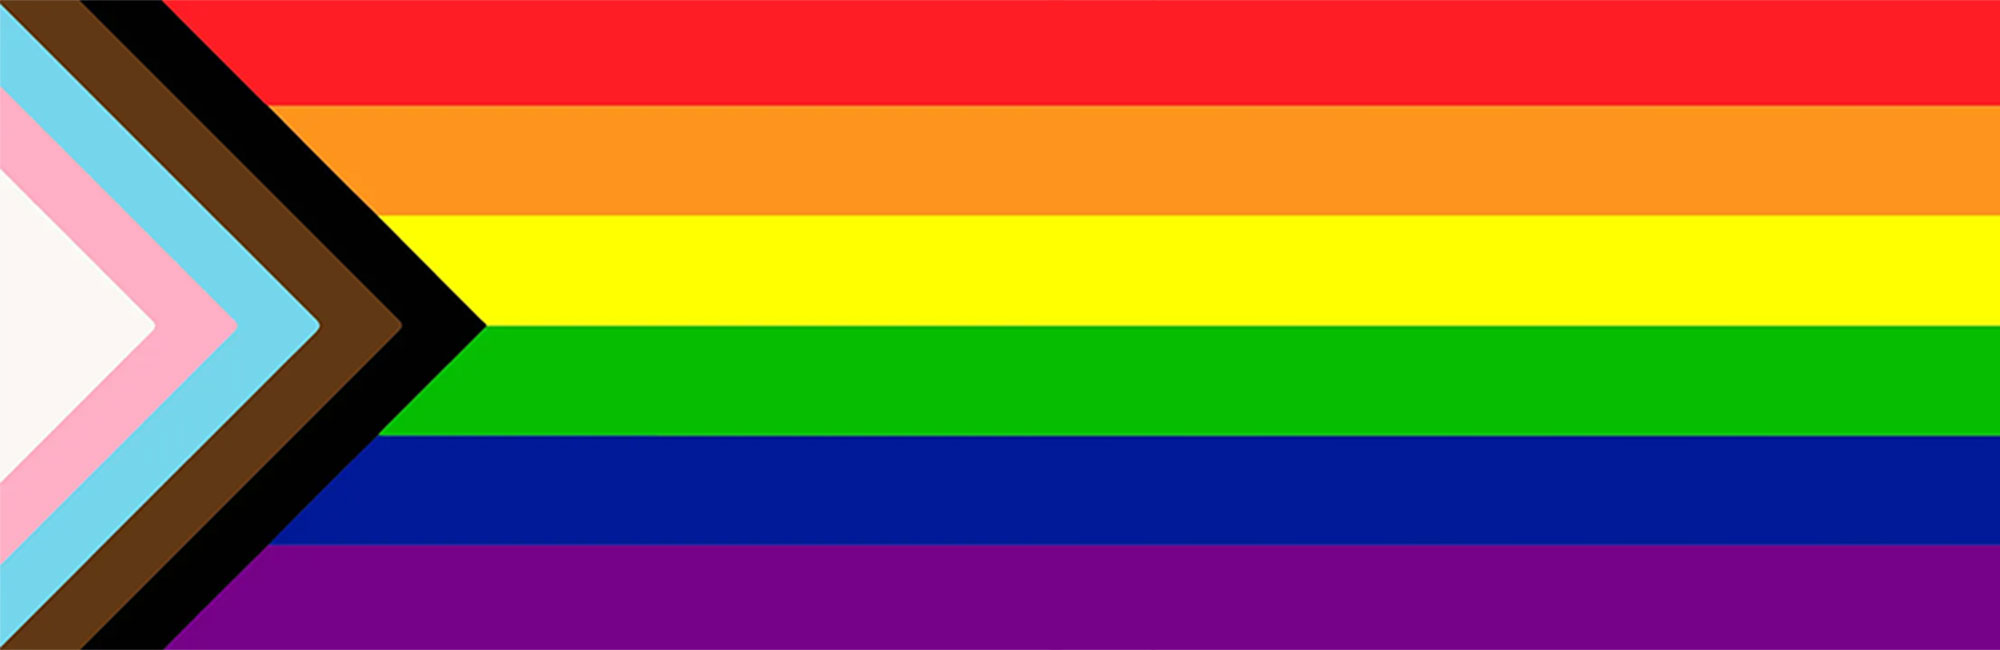 Pride flag with colours, red, orange, yellow, green, blue, purple, black, brown, light blue, pink, and white